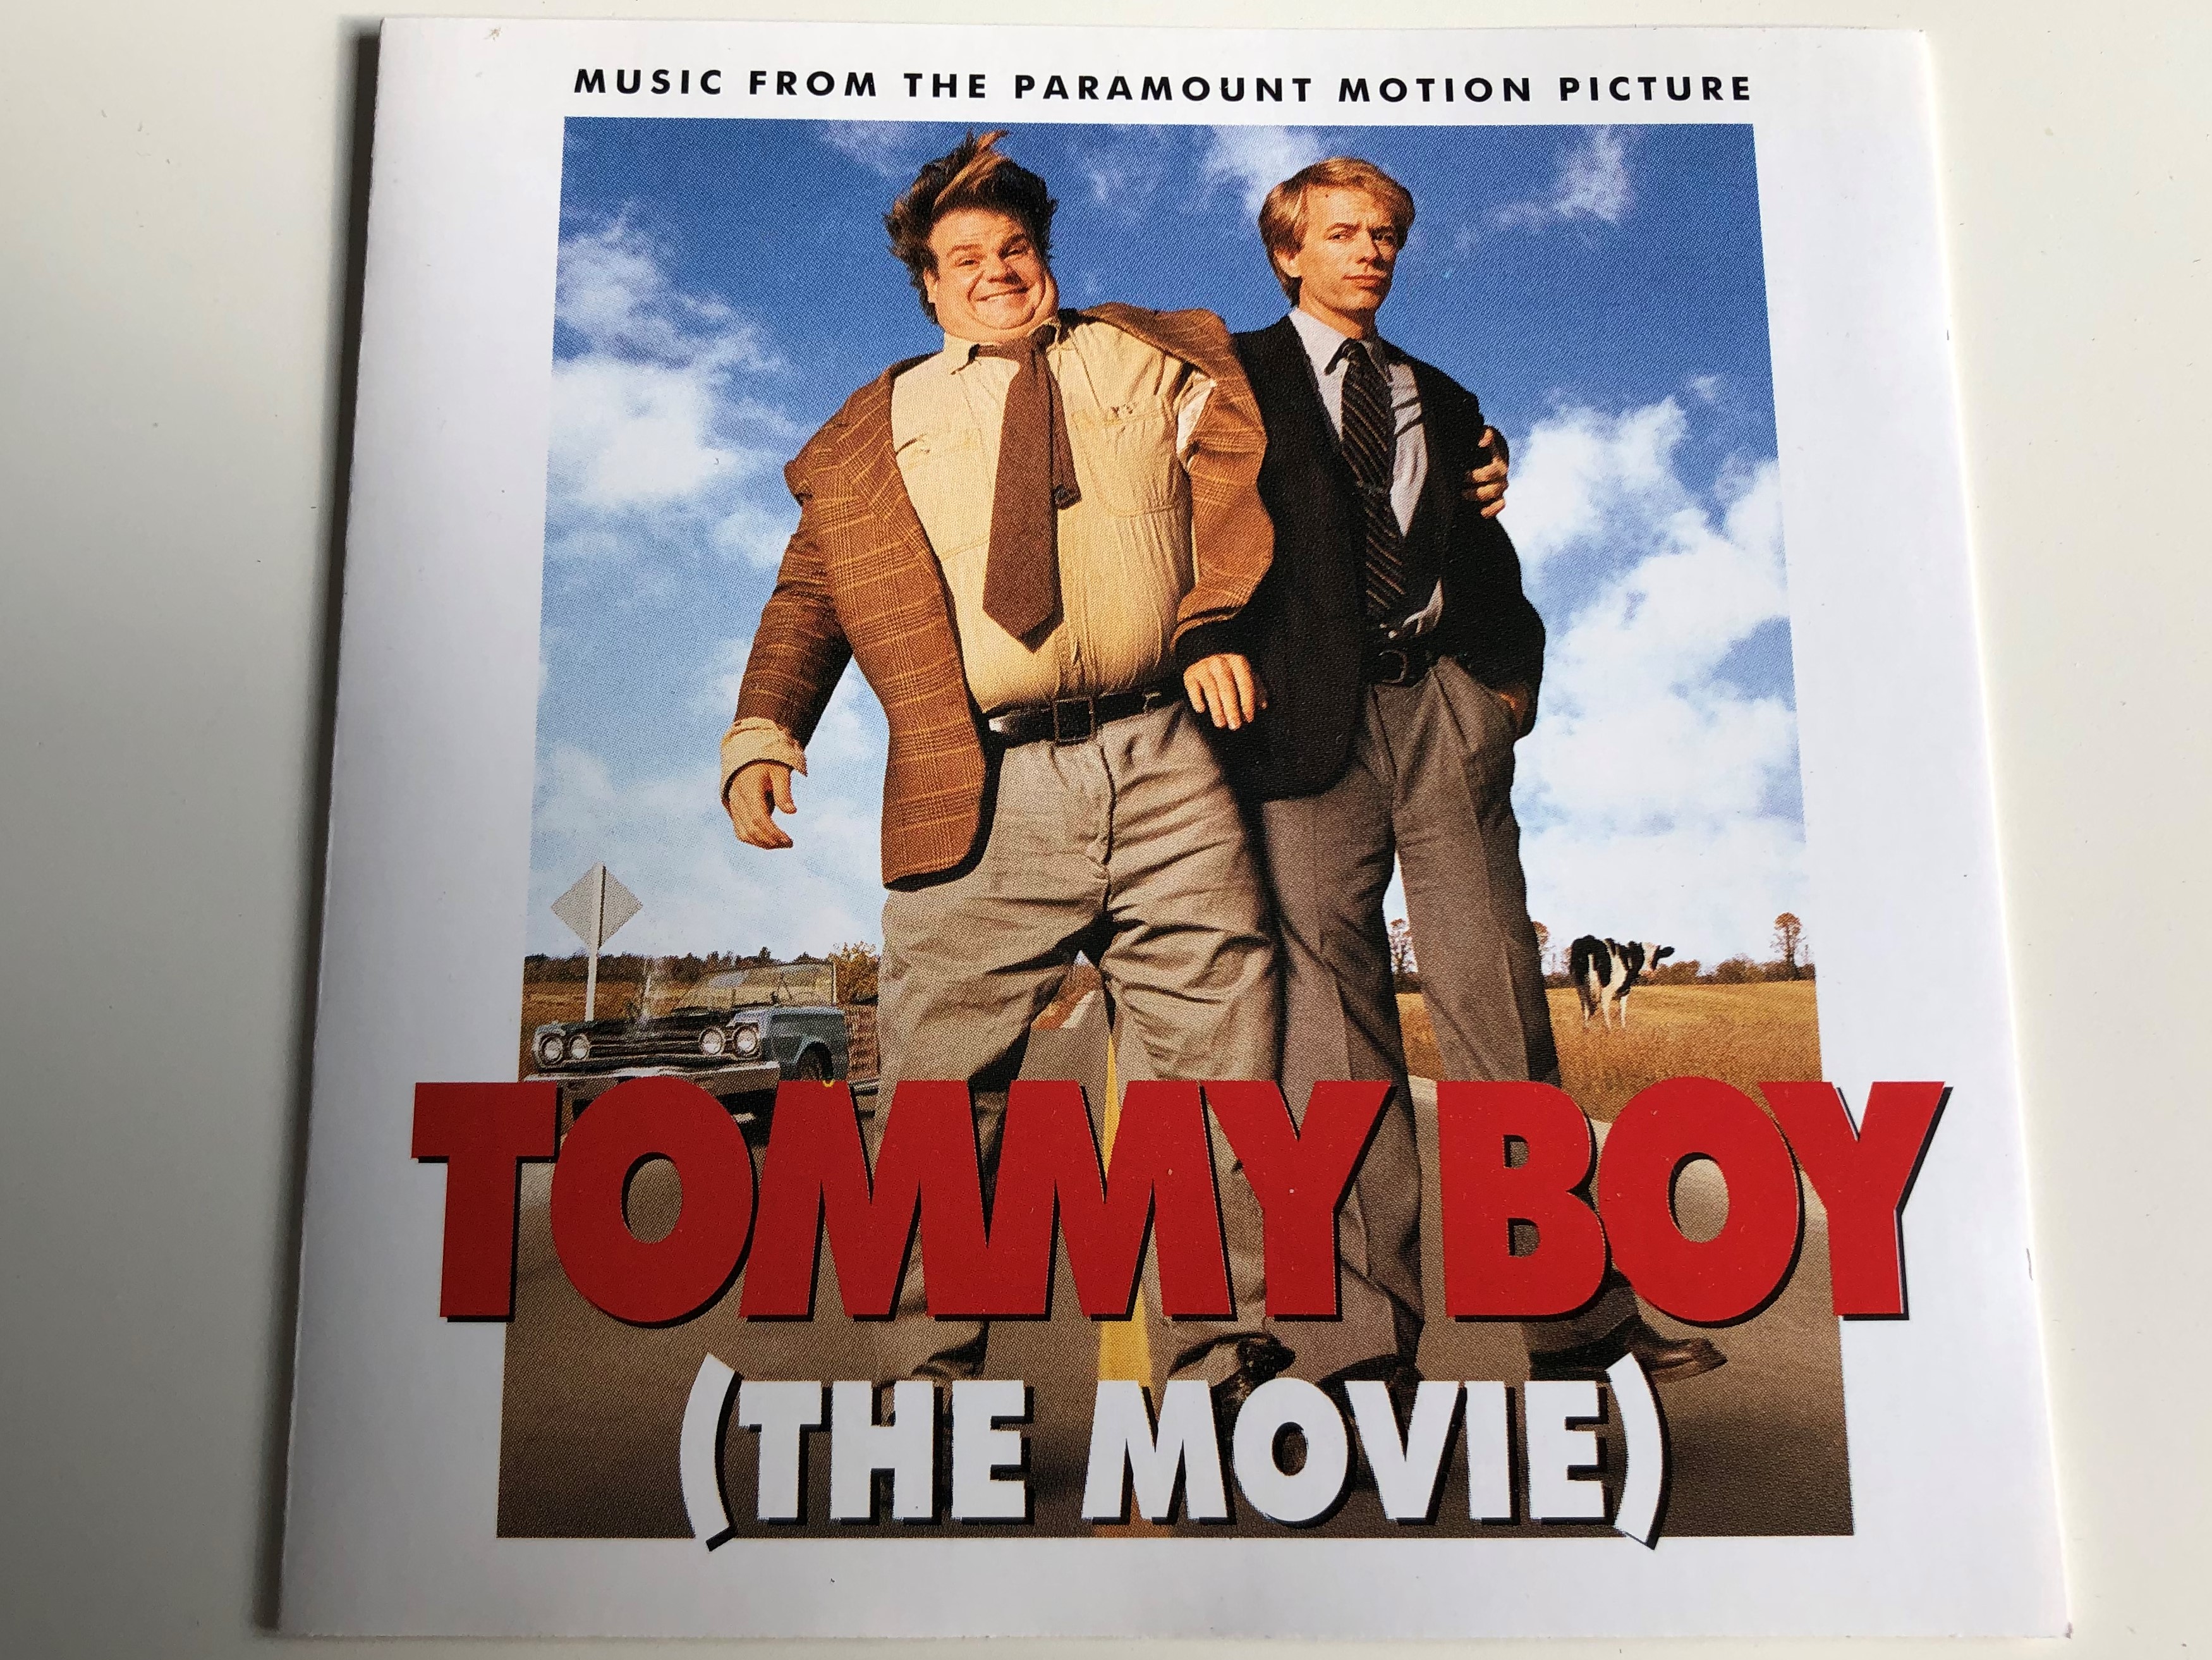 tommy-boy-the-movie-music-from-the-paramount-motion-picture-i-love-it-loud-graduation-silver-naked-ladies-fat-guy-in-a-little-coat-audio-cd-1995-warner-music-europe-1-.jpg